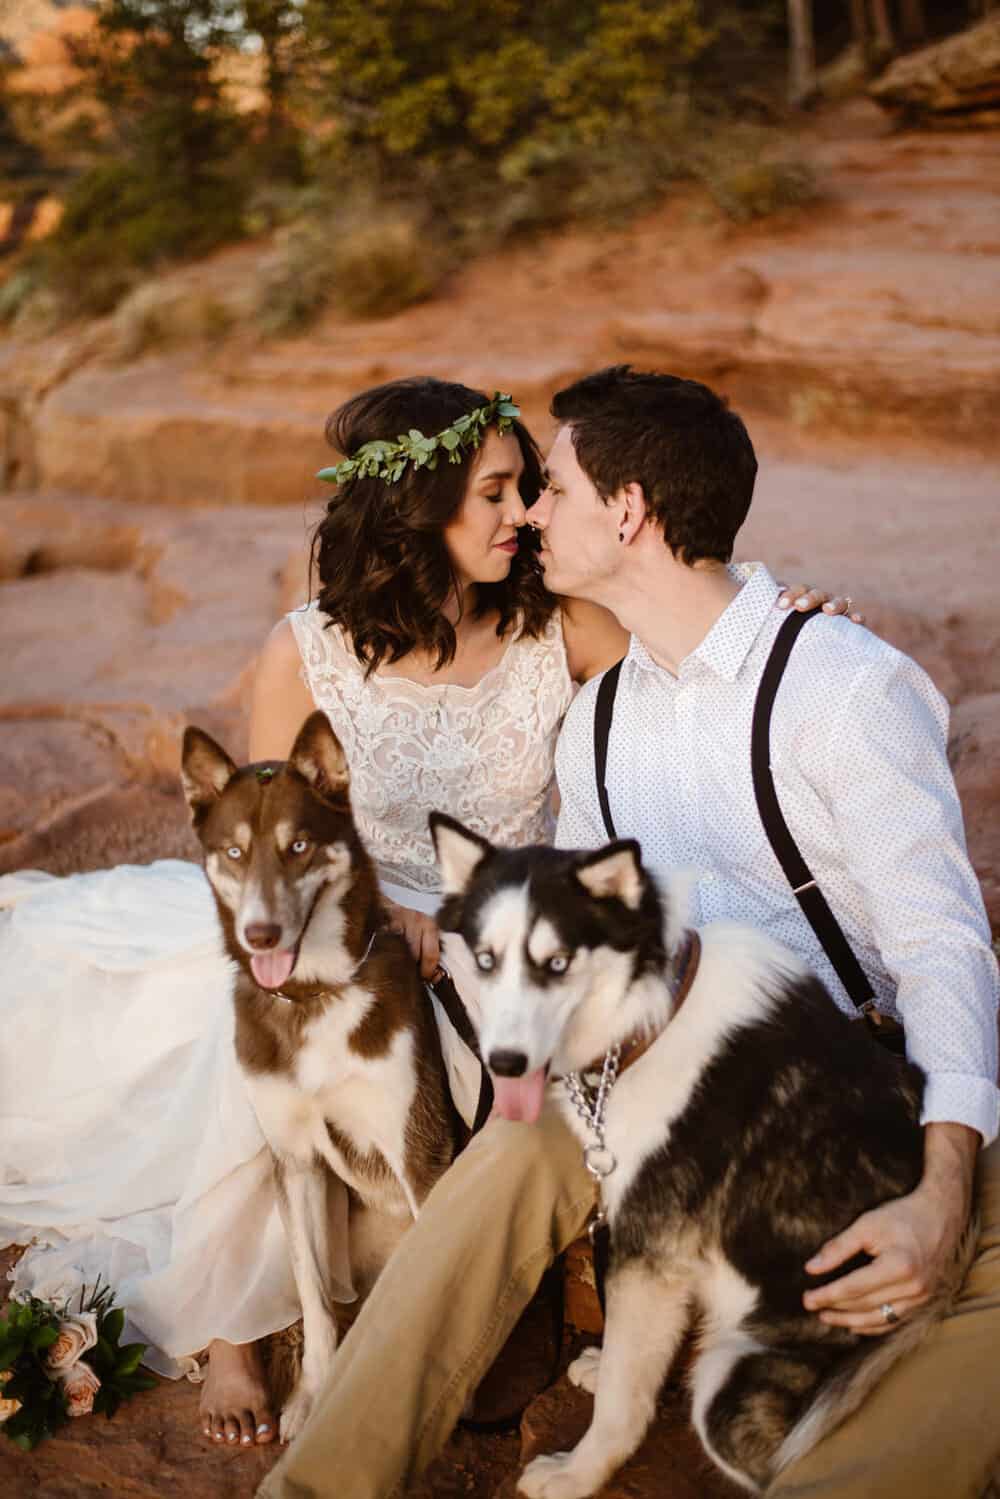 A couple on their wedding day with their two dogs.